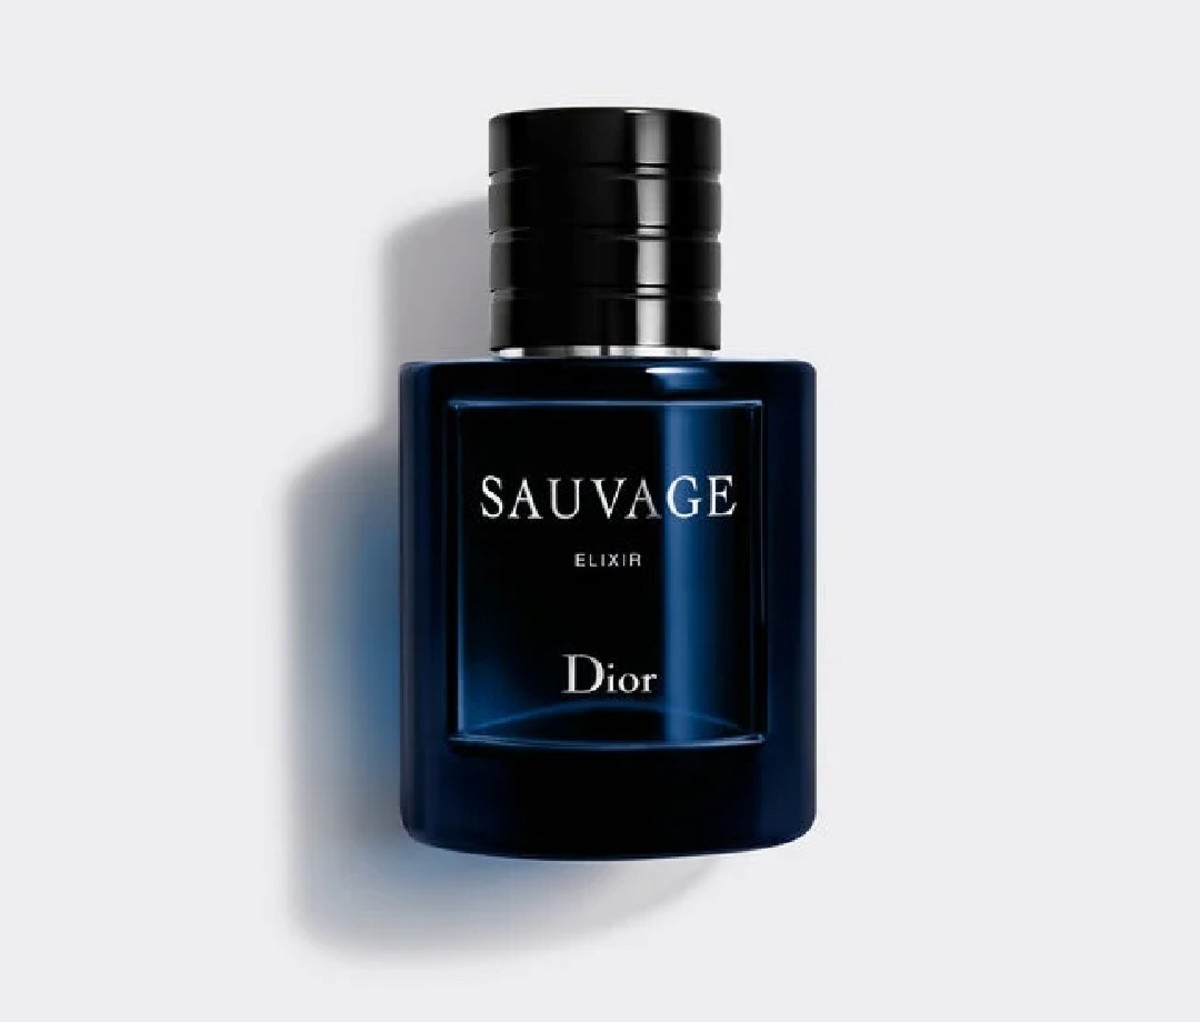 A bottle of Dior Sauvage Elixir: The Best Fragrance and Cologne for Men